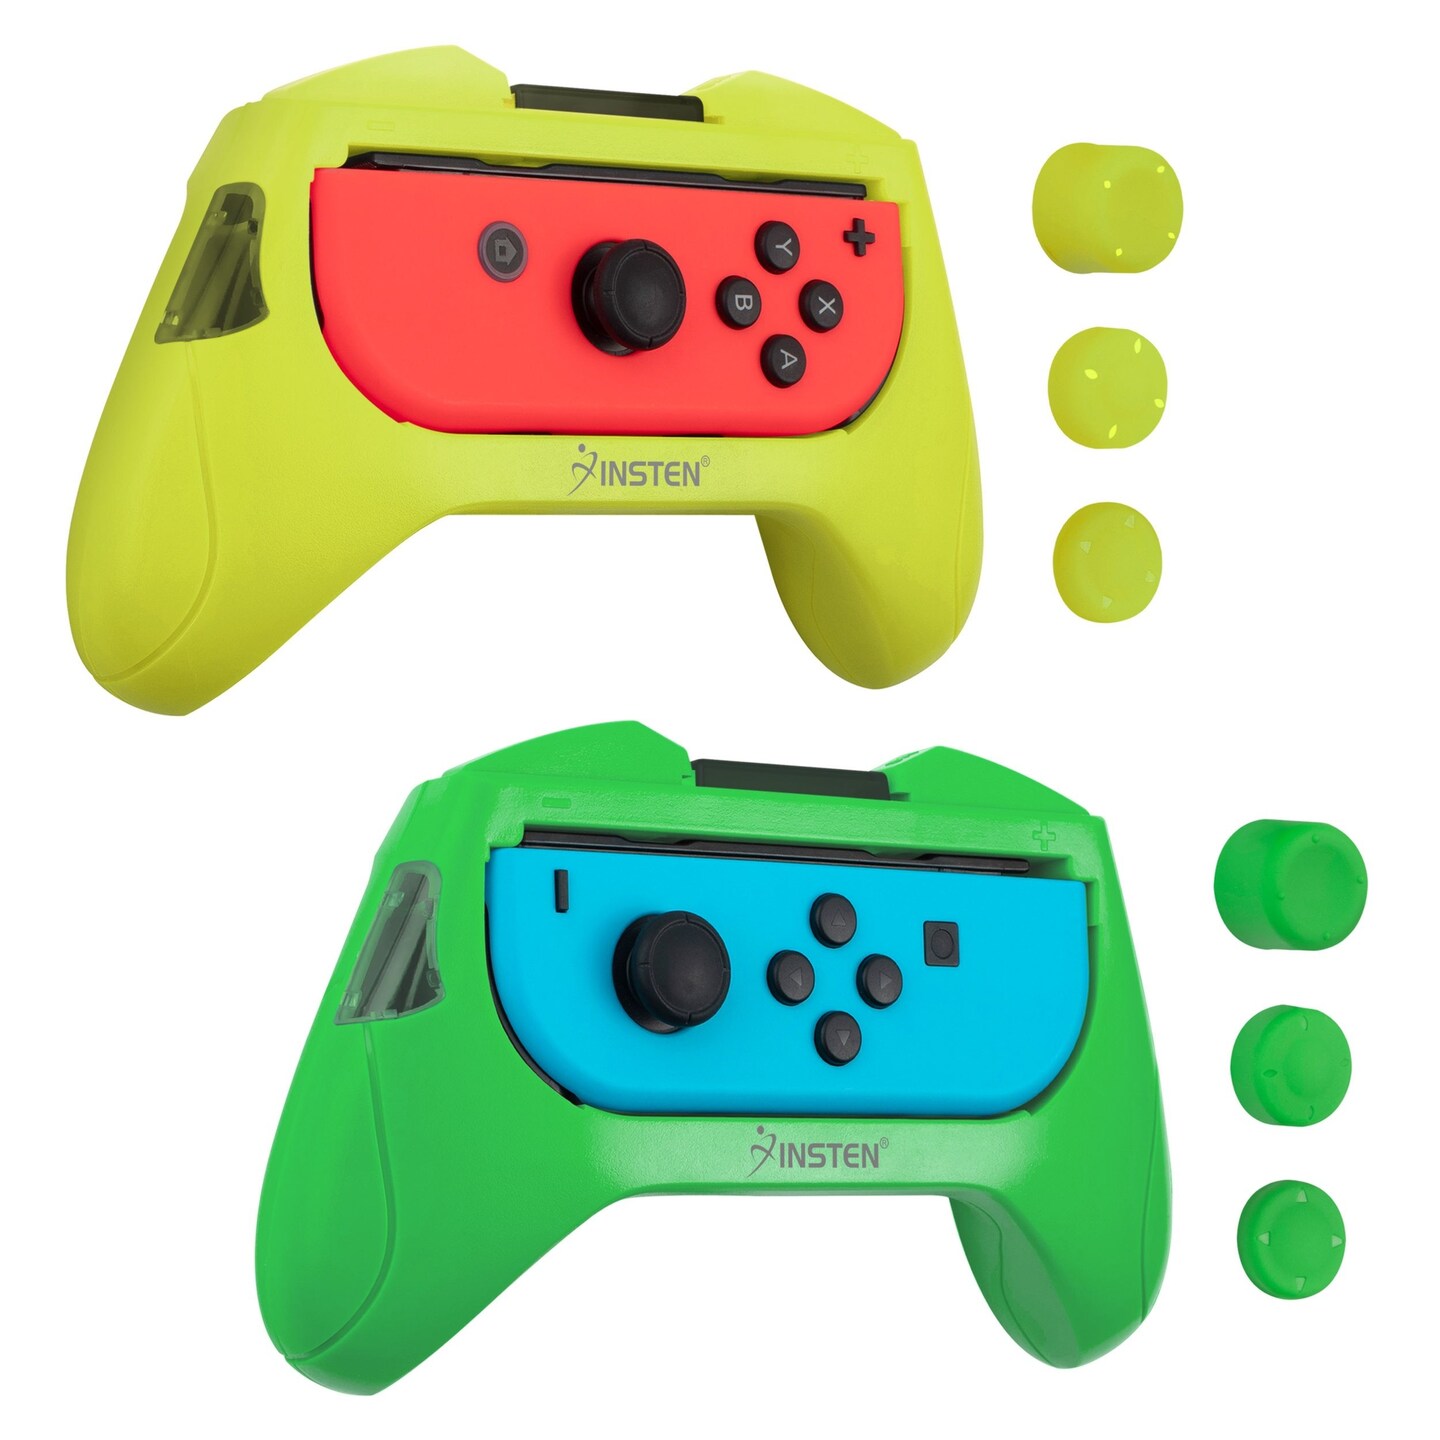 Switch Joy Con Controllers